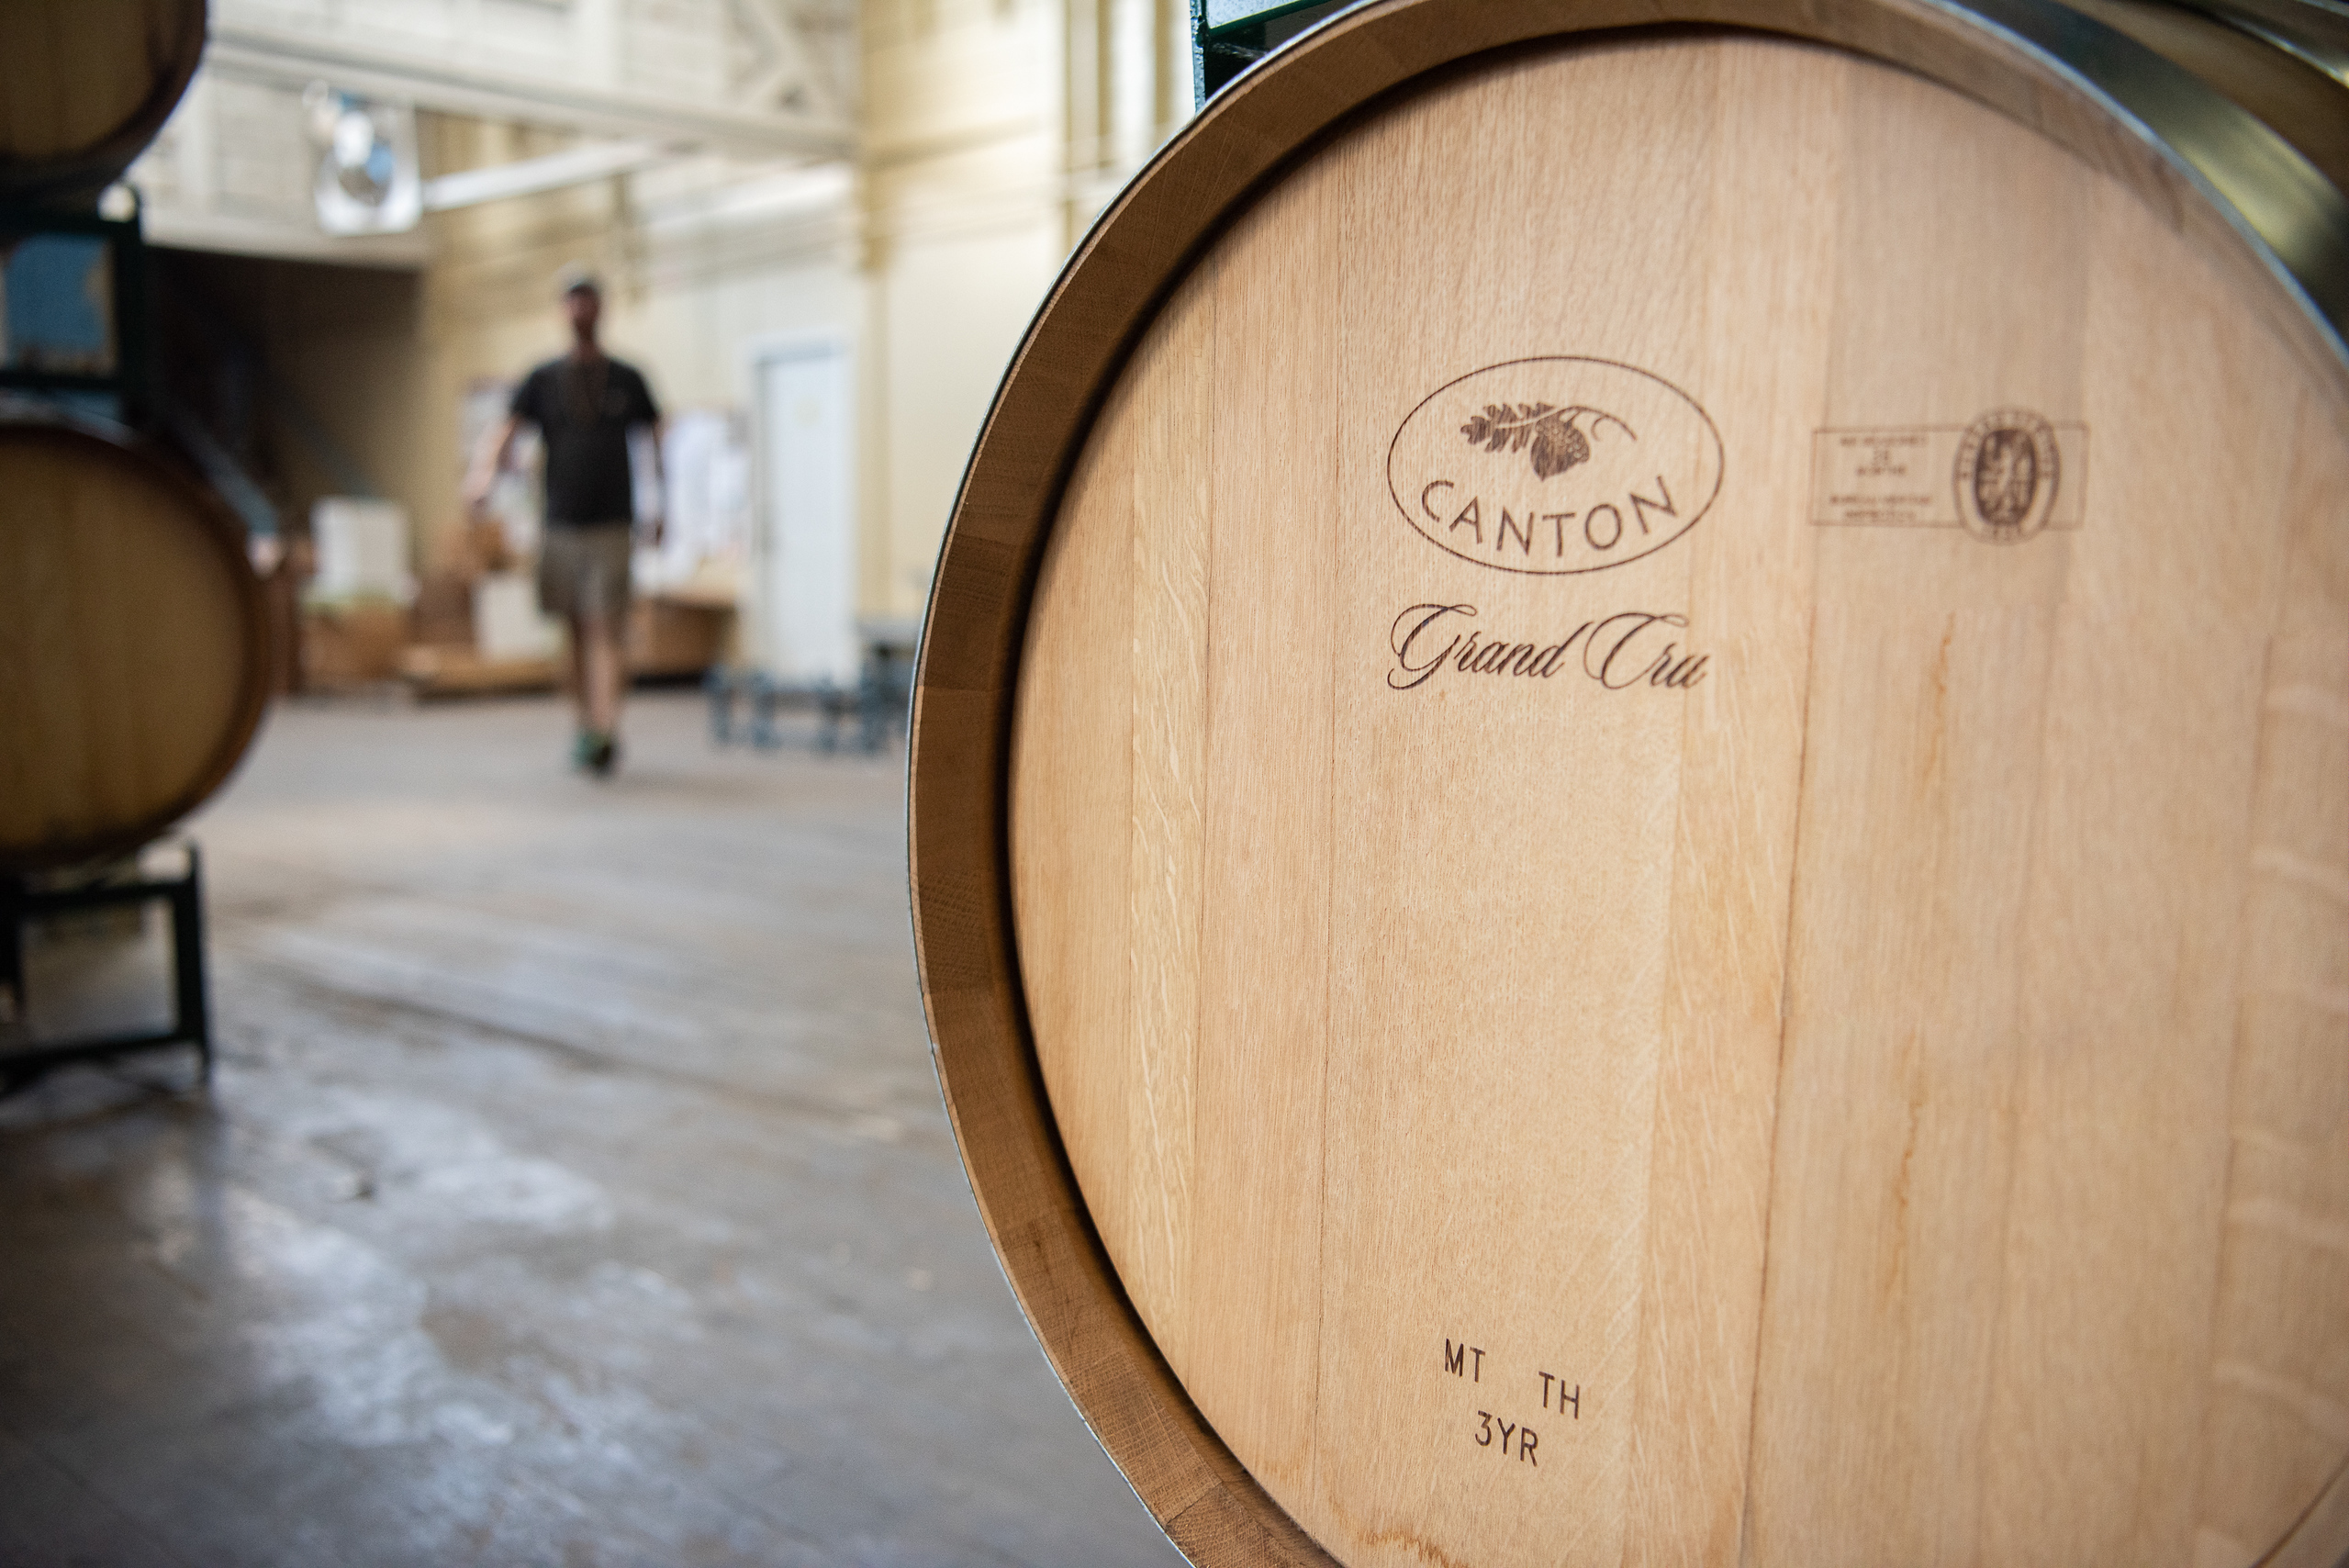 A wine barrel sits in the foreground, with other wine barrels and a person walking in the background.